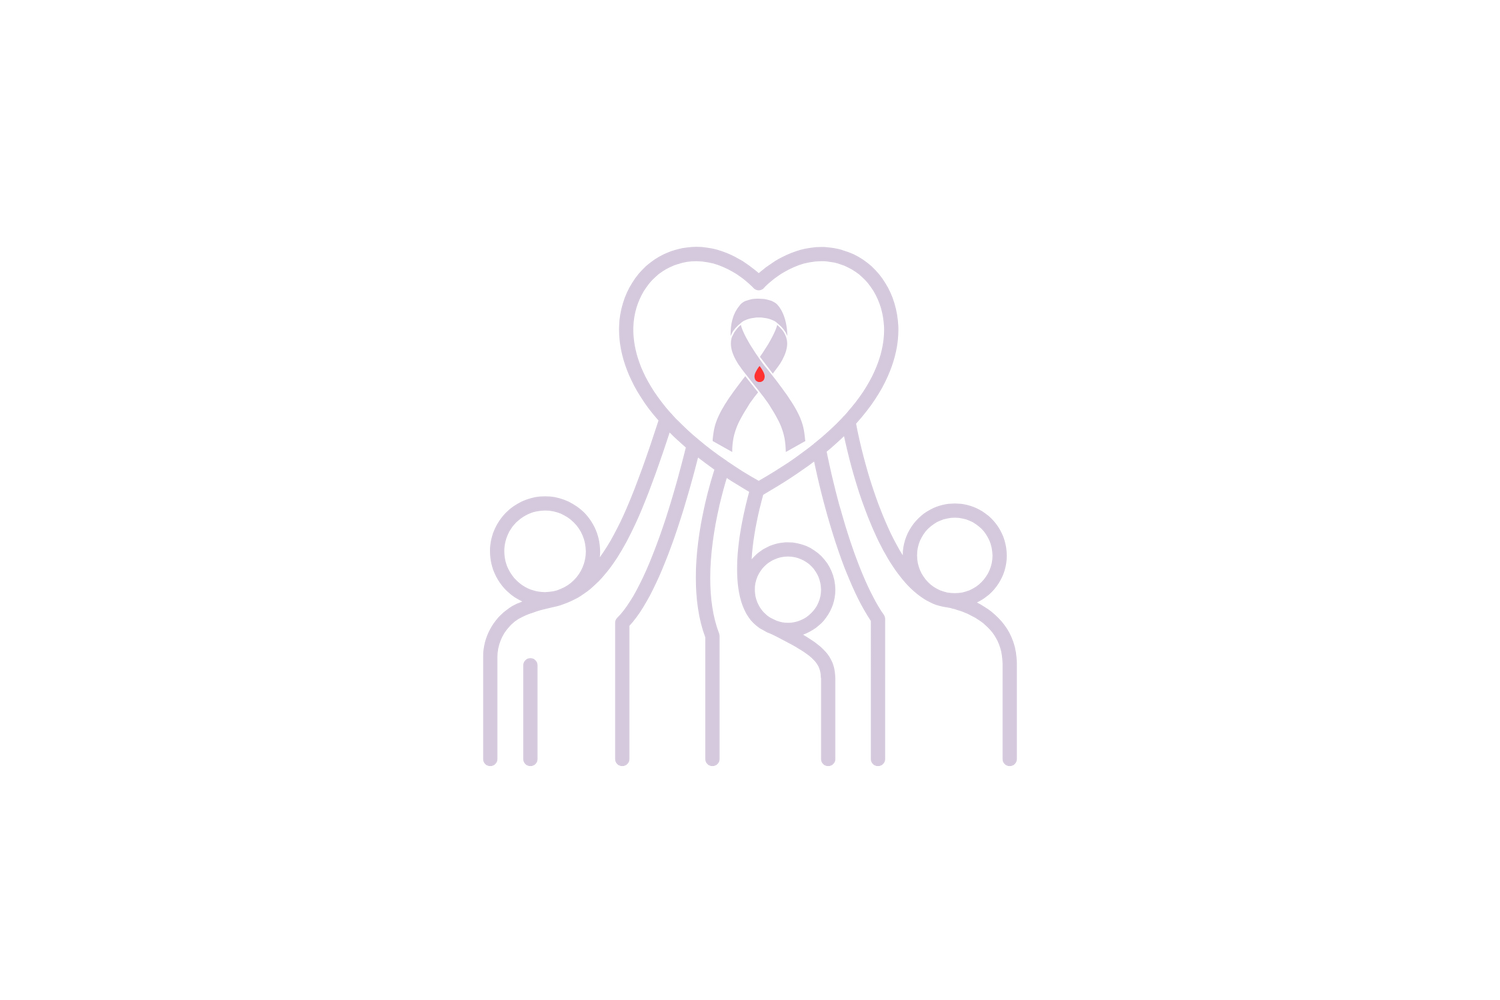 Icon of stick figures holding up a heart with diabetes symbol in center of heart on a white background.